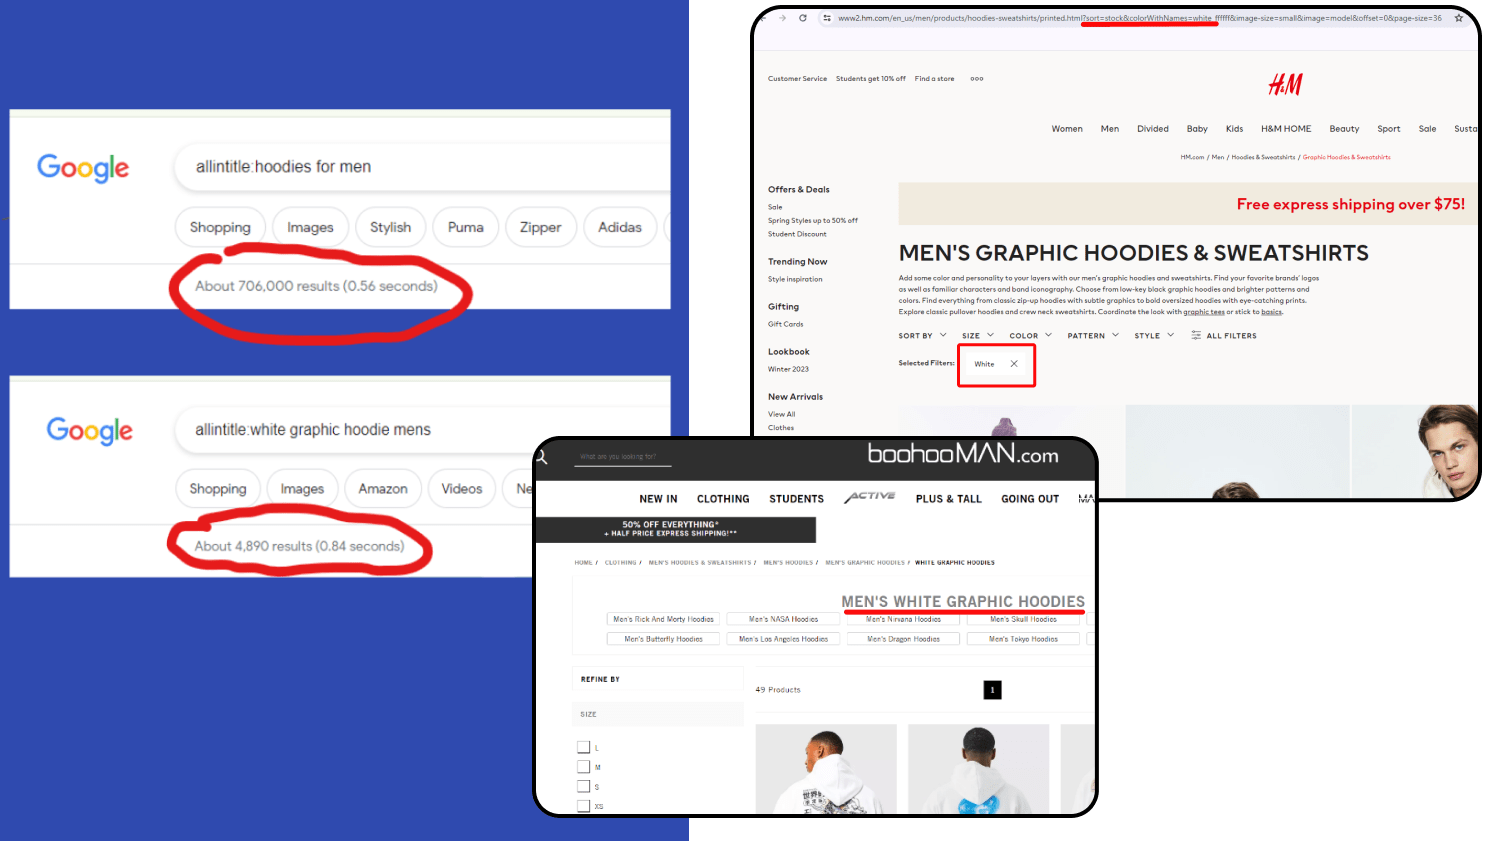 eCommerce SEO mistakes - Product filters